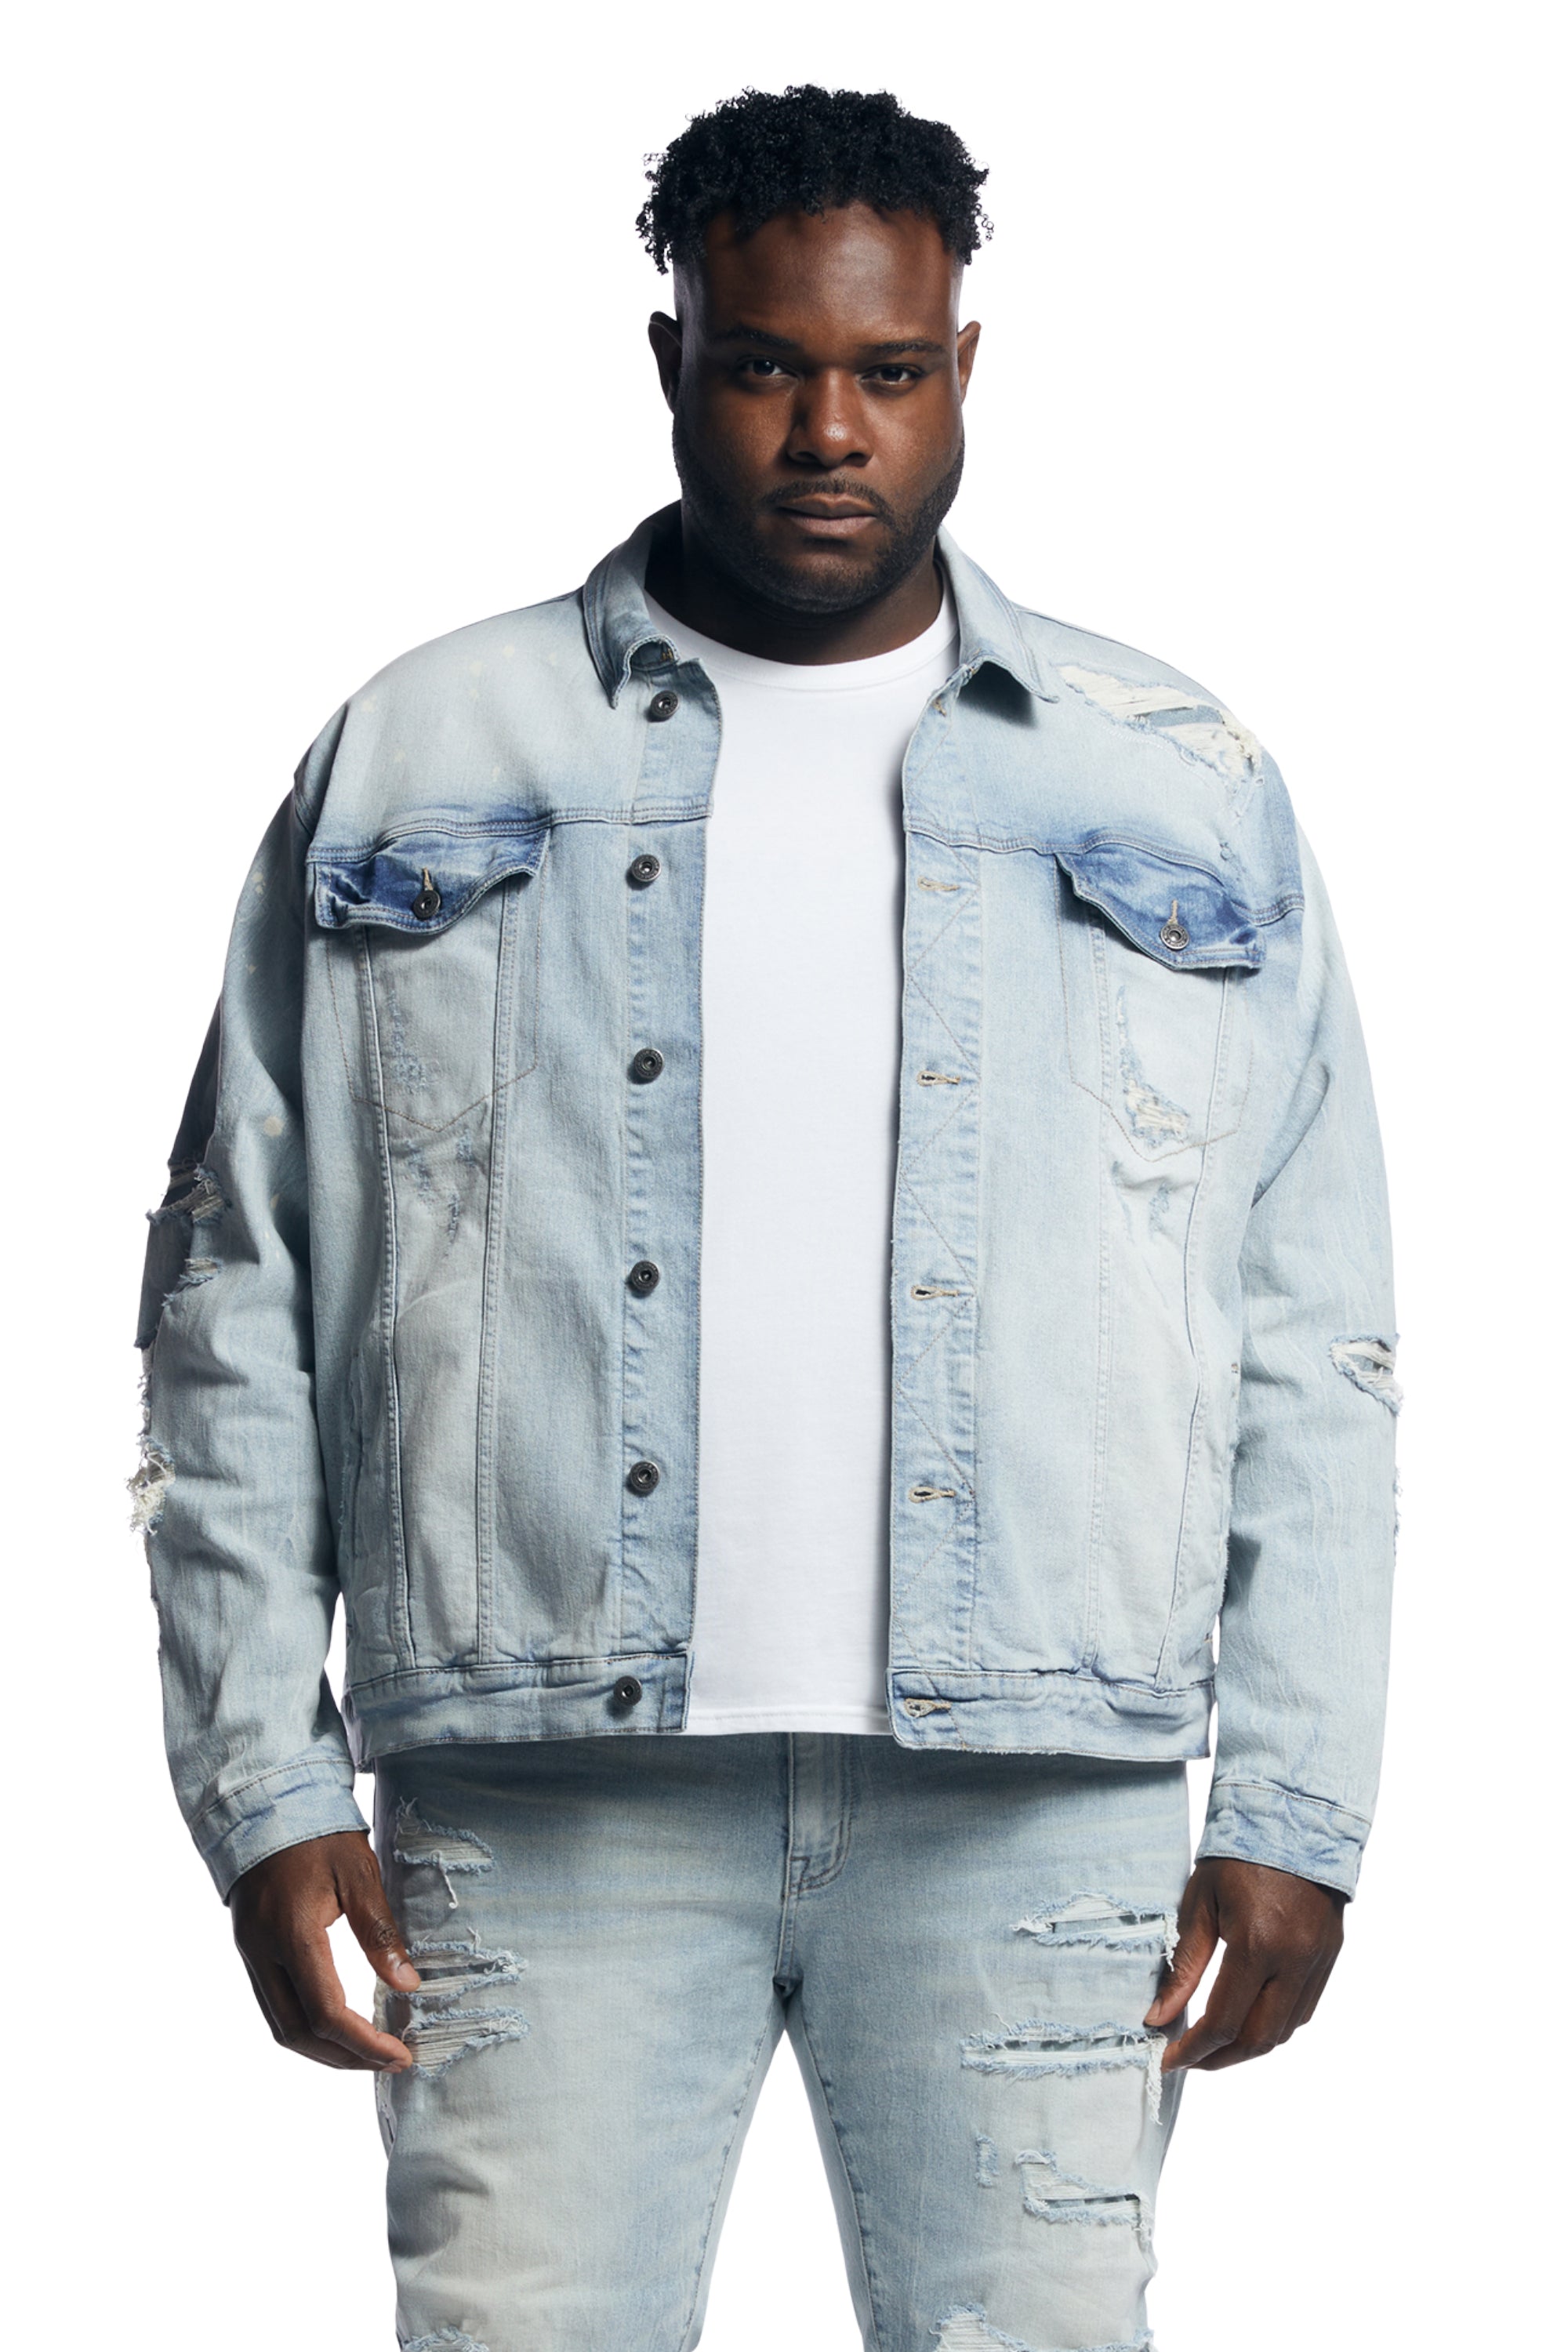 Big and Tall - Rip & Repaired Color Denim Jacket - Natick Blue